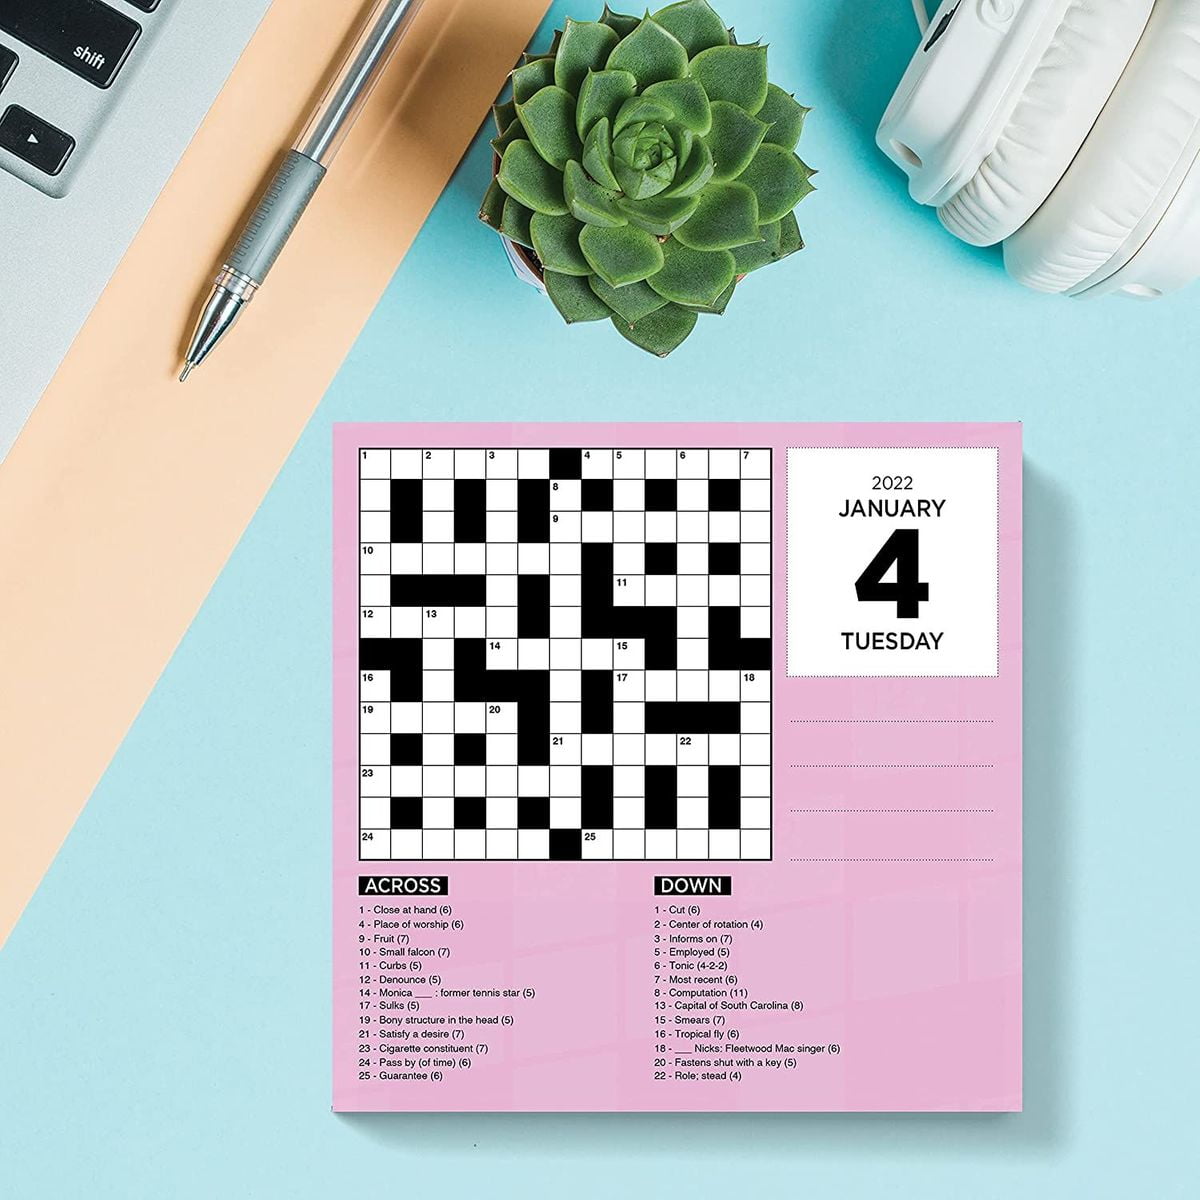 TF PUBLISHING 5.25” x 5.25” Fold-Out Cardboard Easel Home or Office Organizer Tear-Off Pages 2022 Crossword Puzzles Daily Desktop Calendar